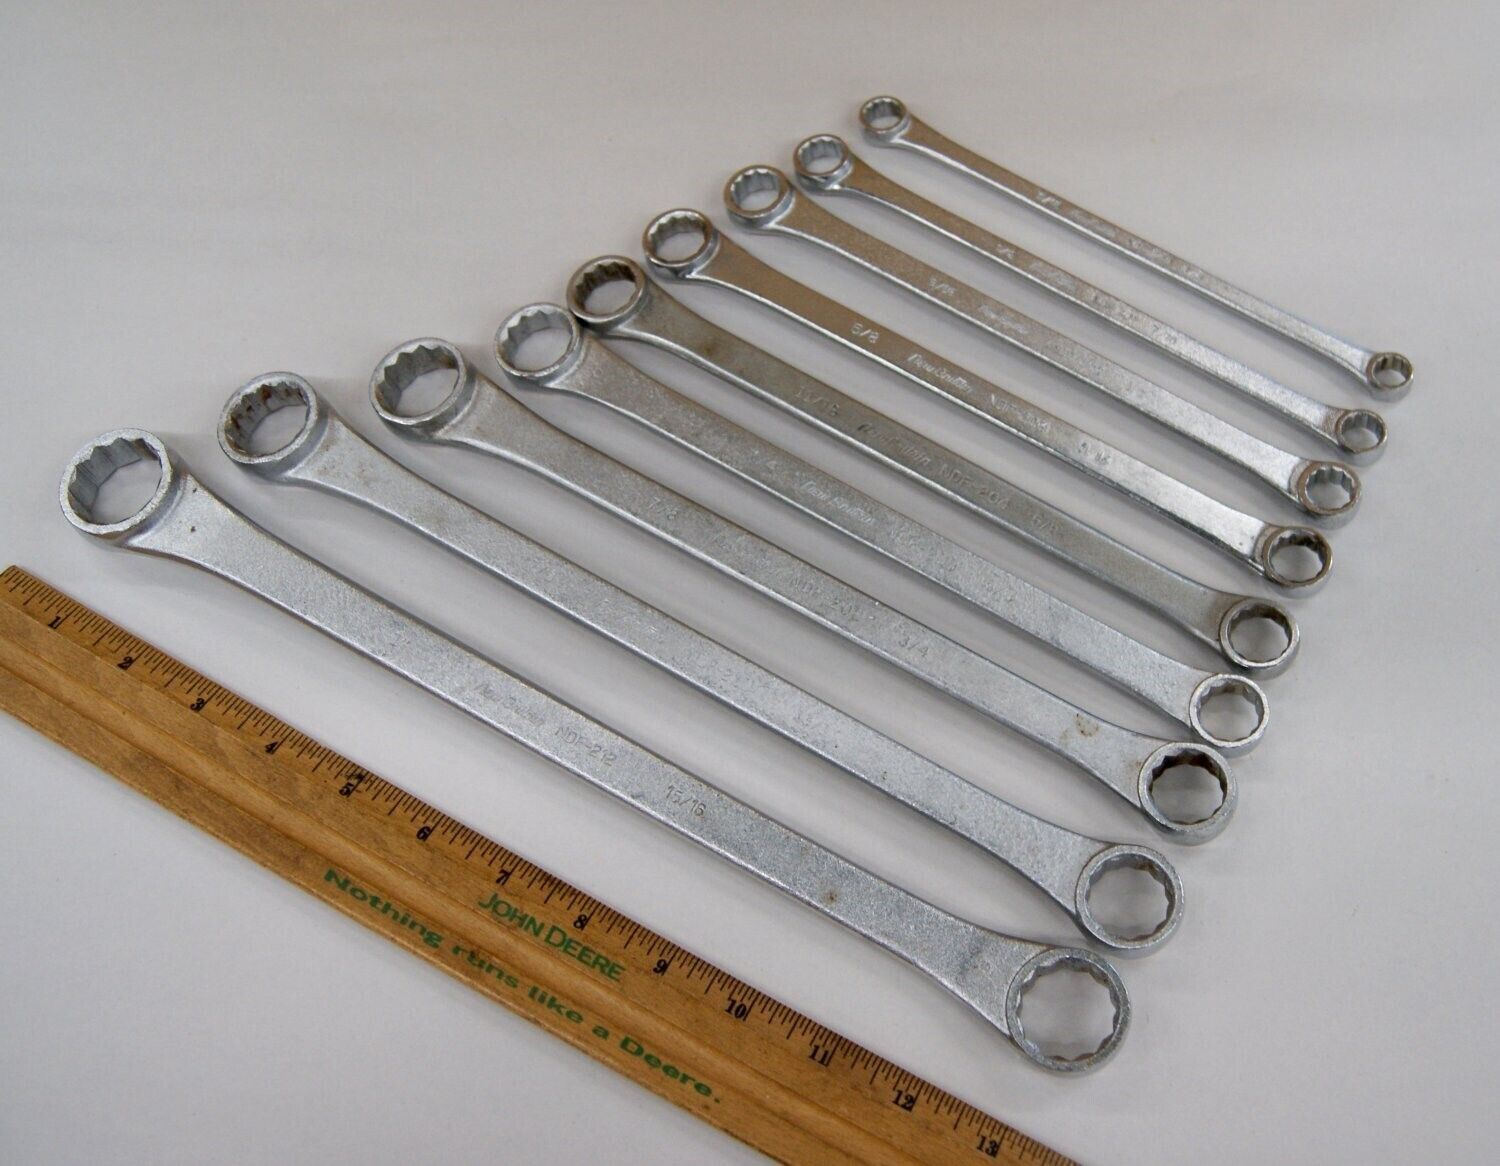 New Britain USA 9pc, 12pt SAE Double Box End Wrench Set 3/8 to 1 inch VGC BN2770